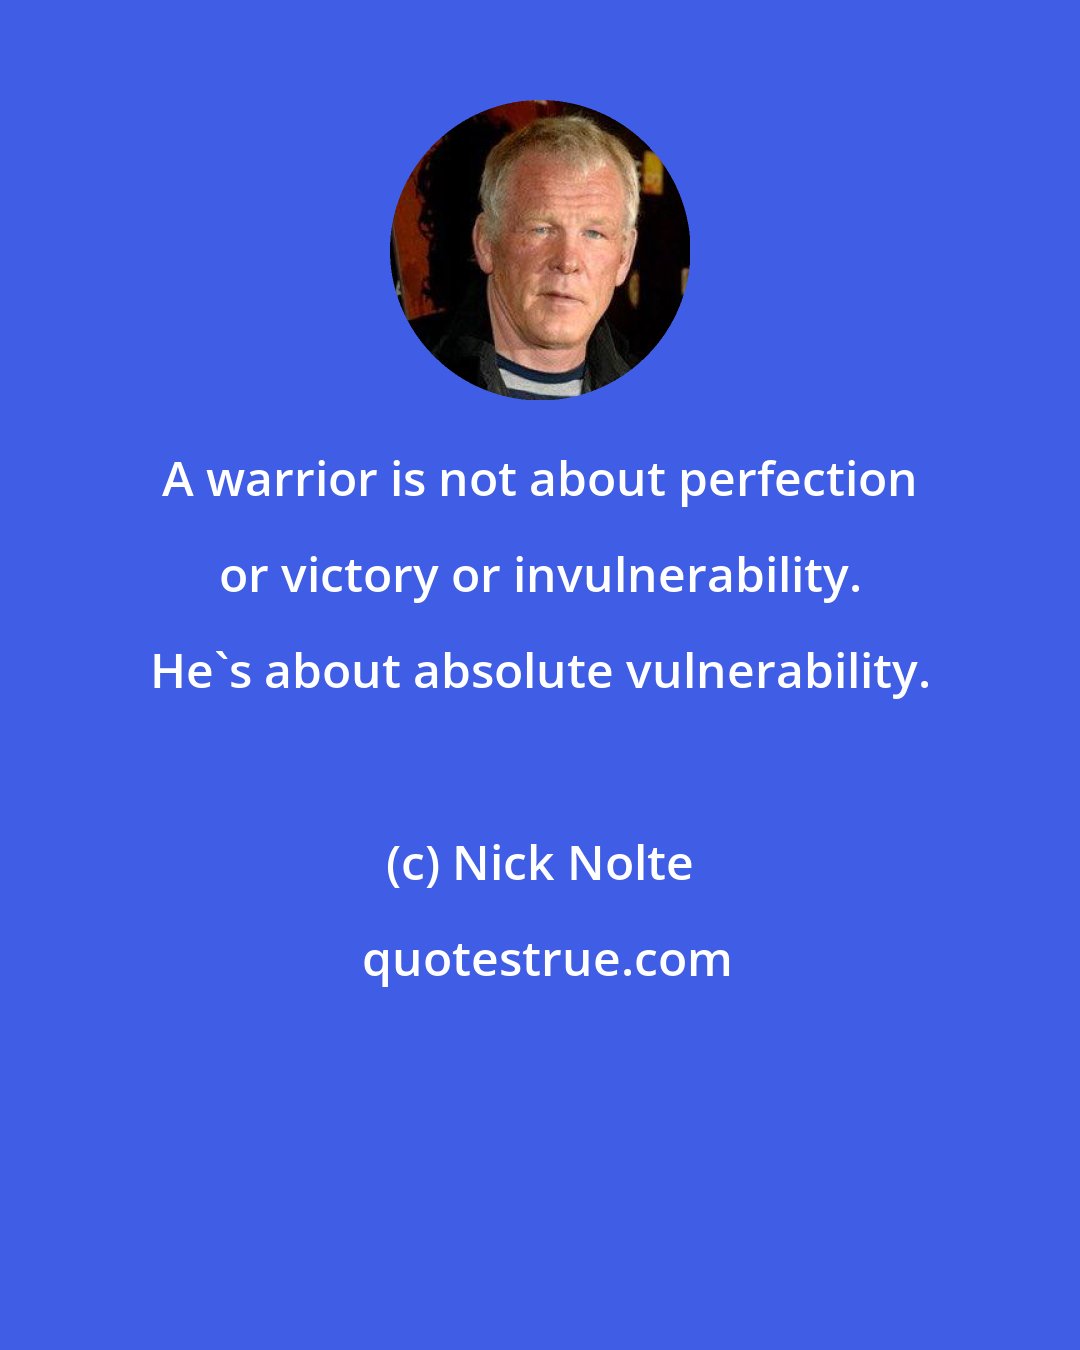 Nick Nolte: A warrior is not about perfection or victory or invulnerability. He's about absolute vulnerability.